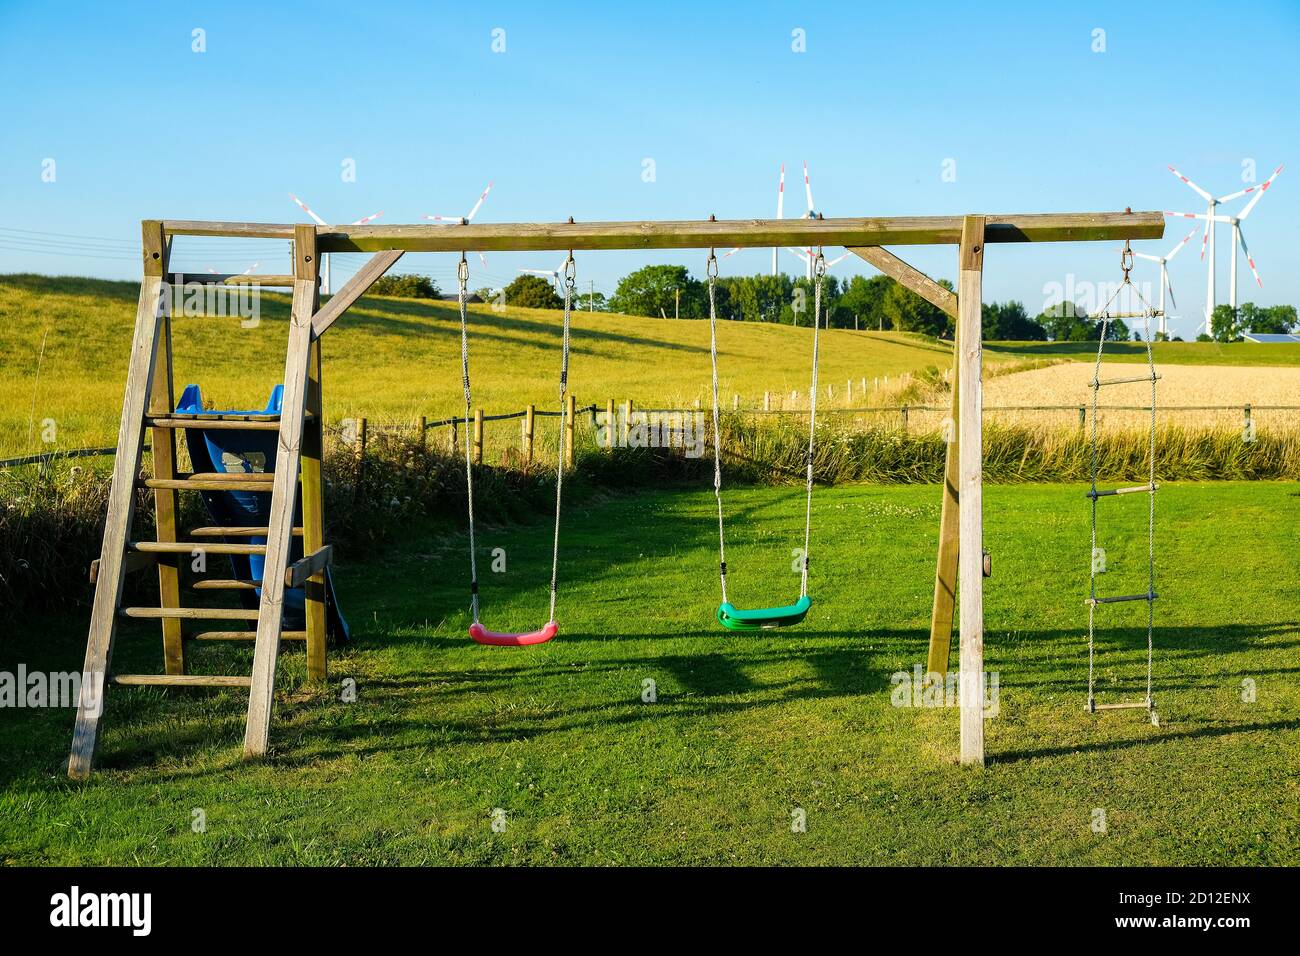 Outdoor playground with swings Stock Photo